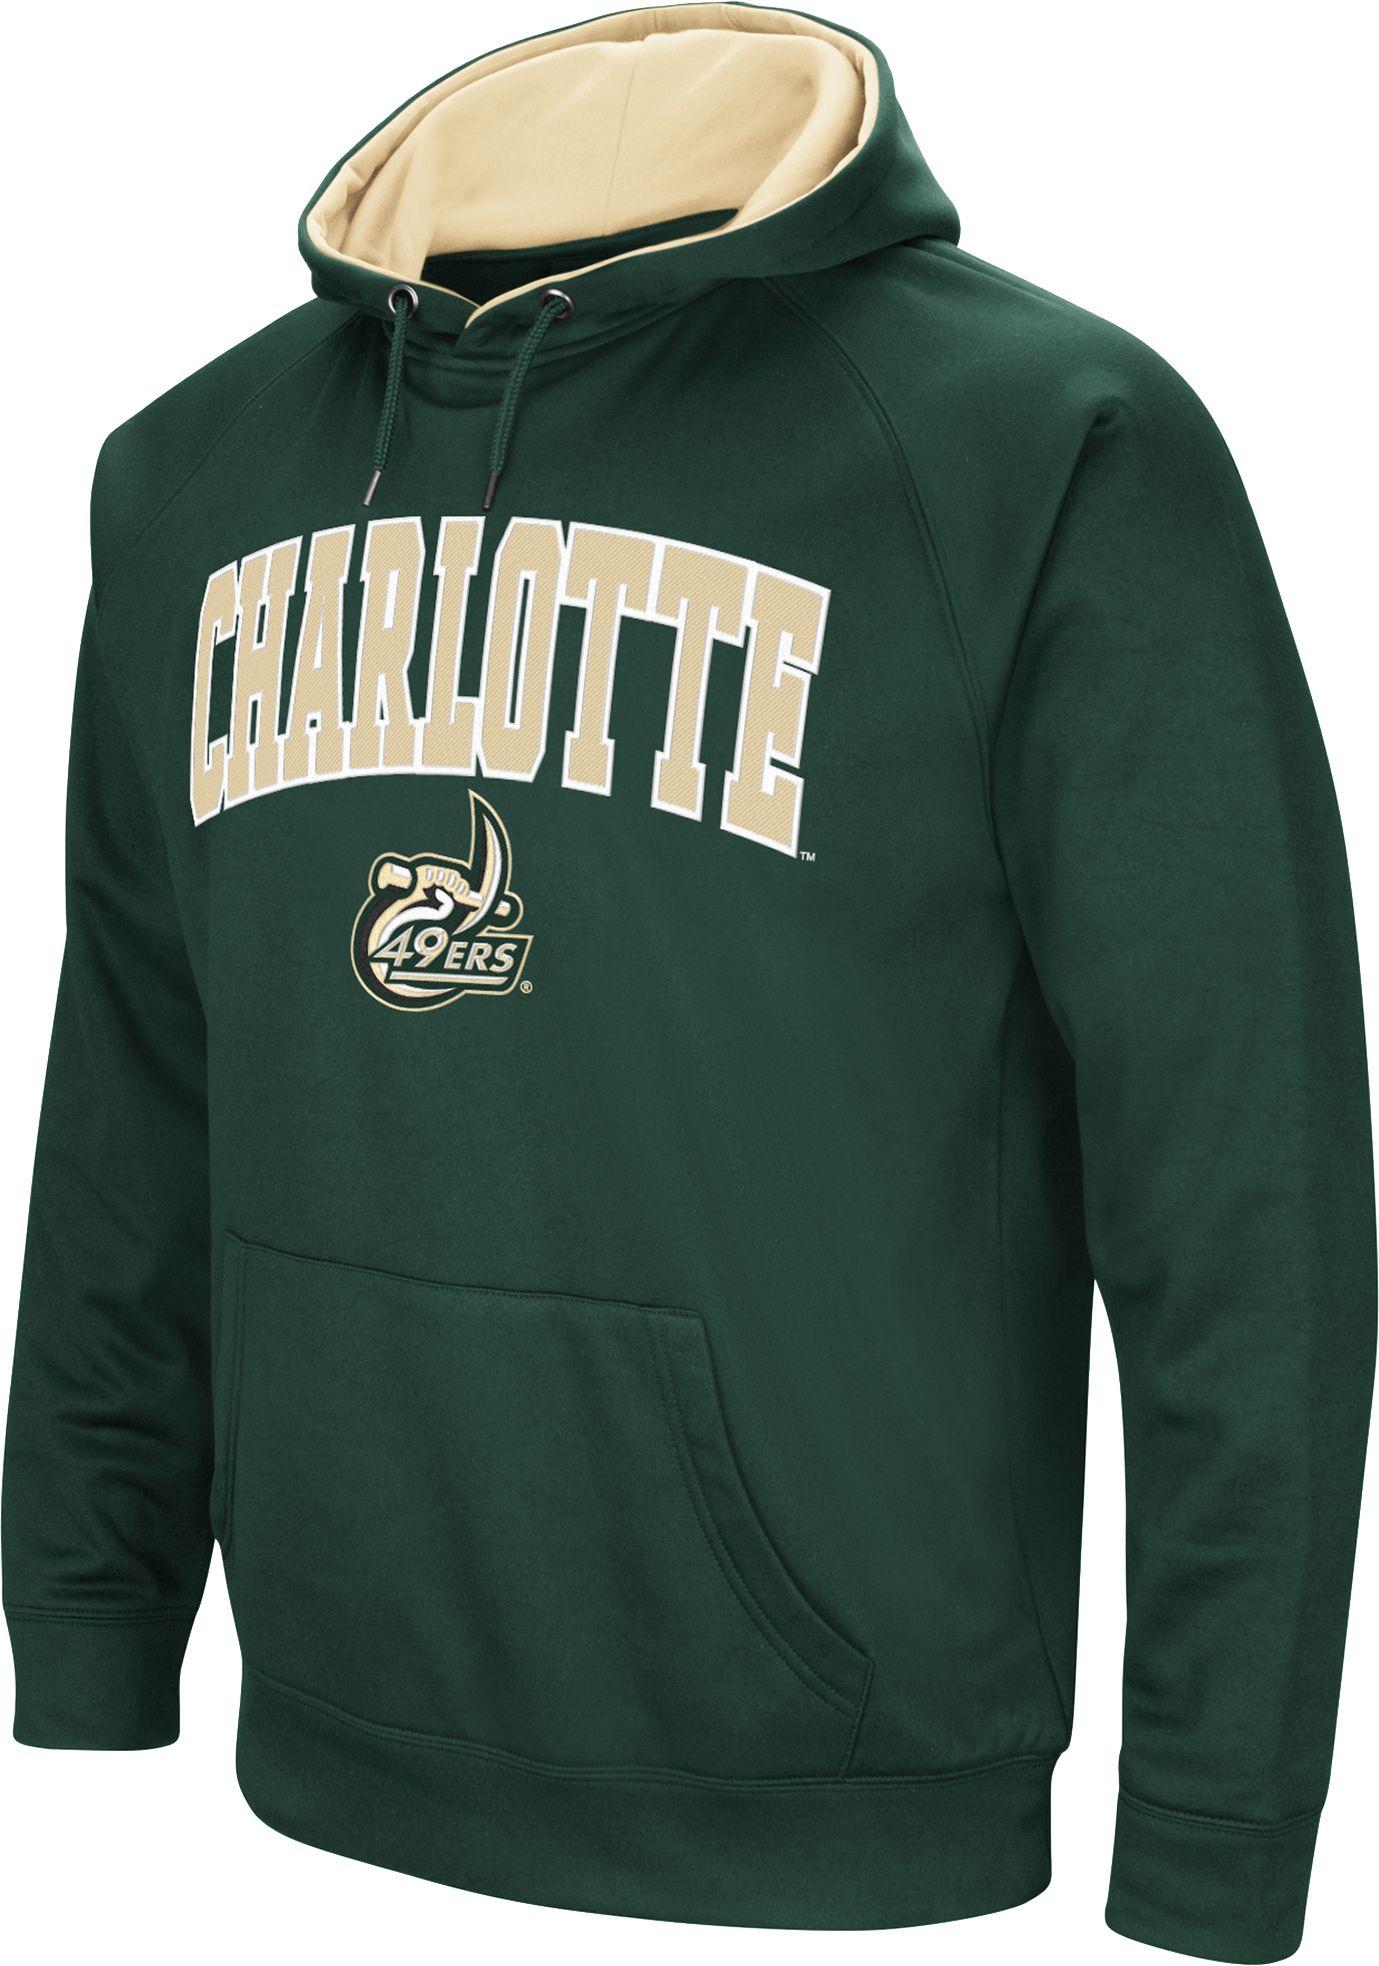 UNC Charlotte Apparel & Gear | DICK'S Sporting Goods